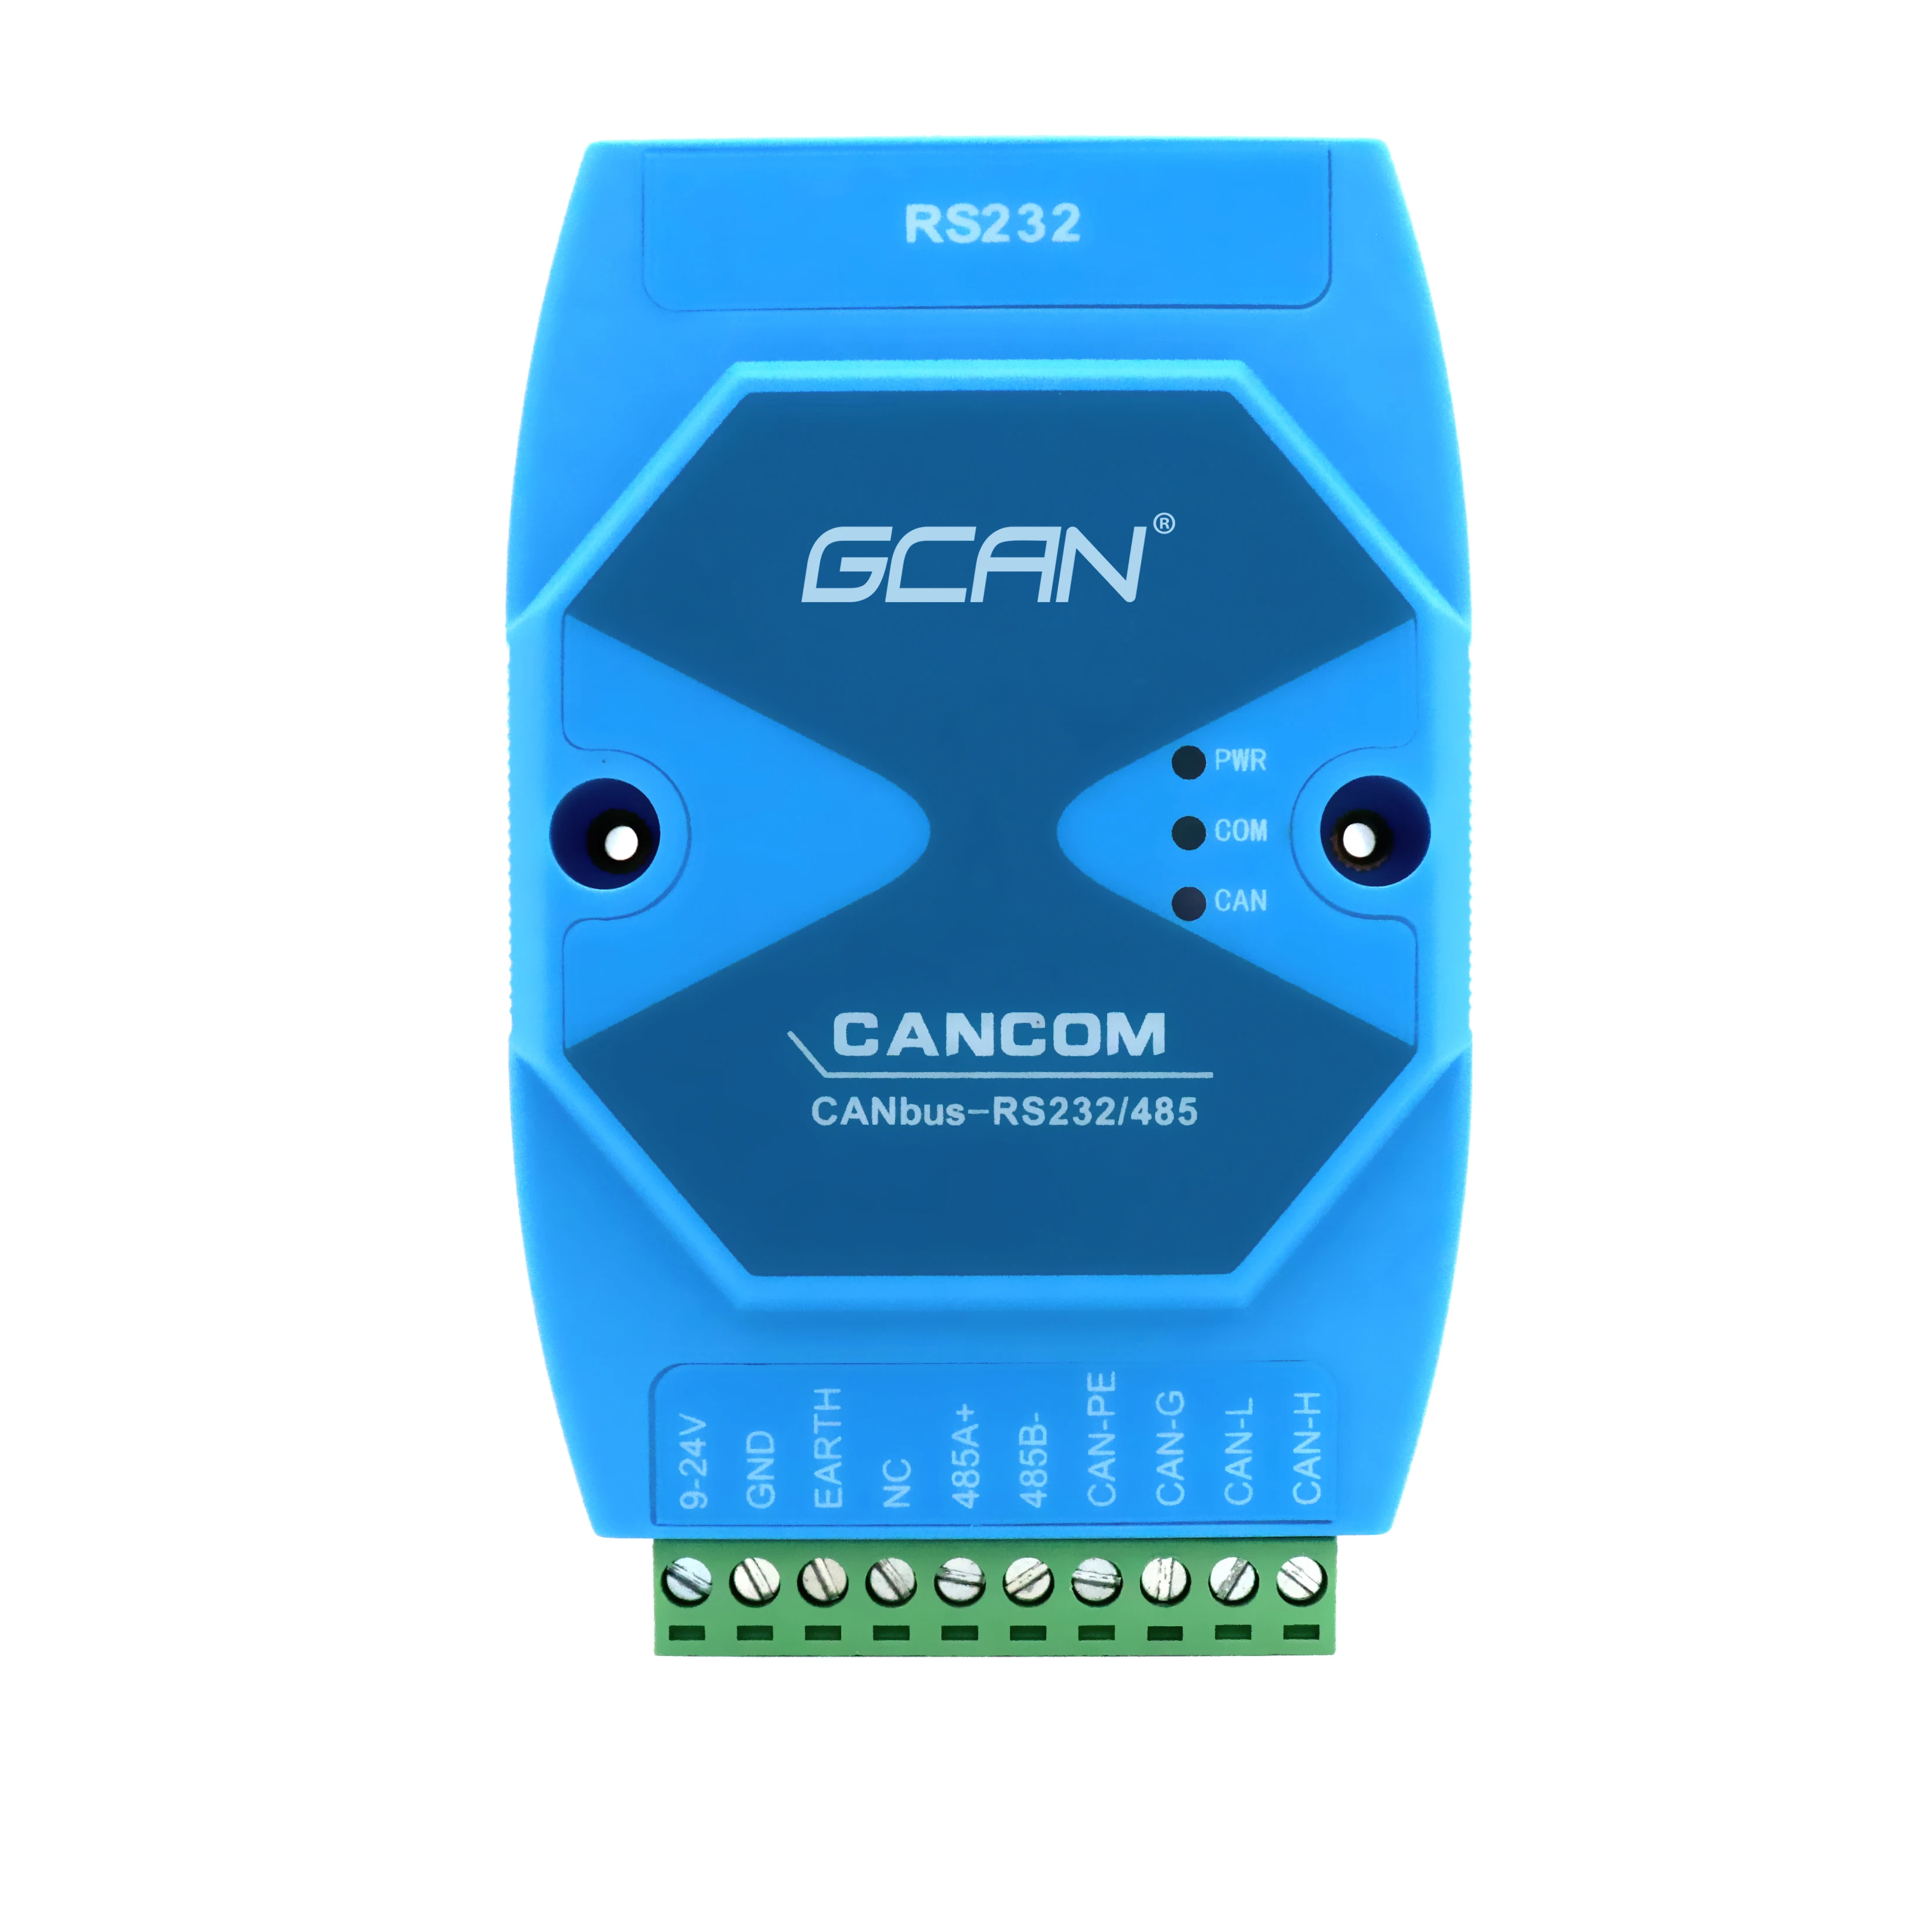 GCAN-207 Bidirectional Communication Between Rs232 Or Rs485 Bus And Can  Realize Real-Time Data Conversion